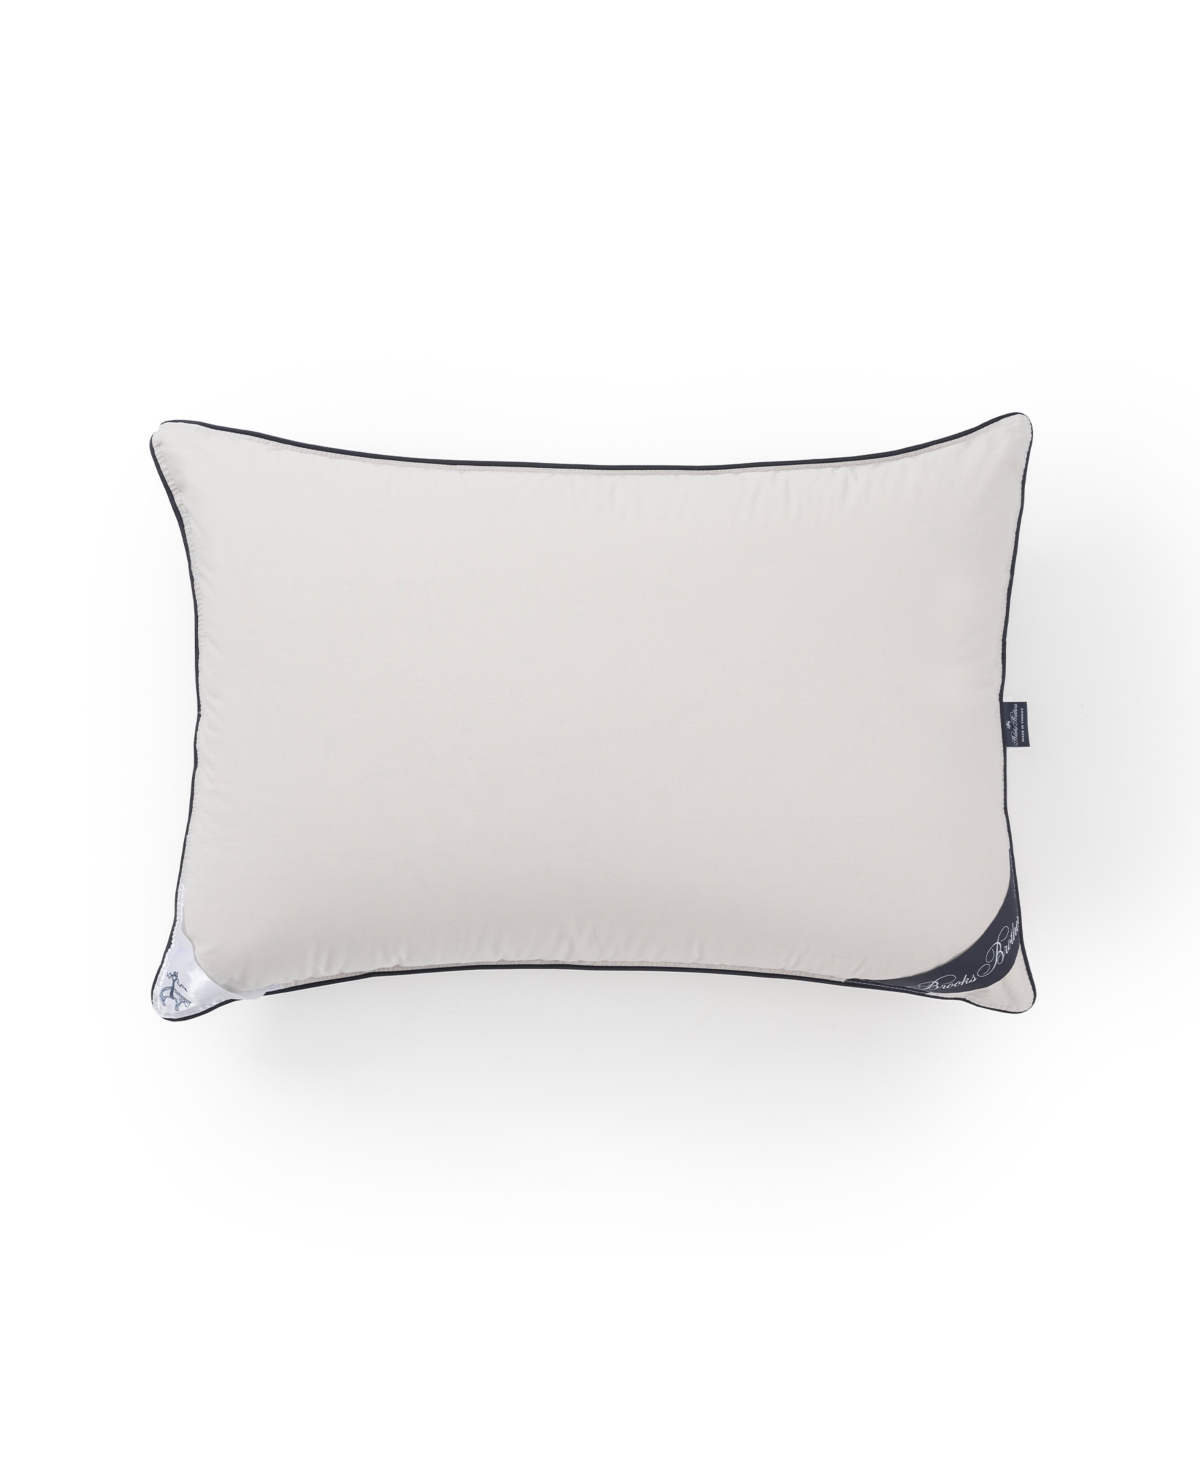 Brooks Brothers Feather Down Cotton Pillow, Queen In Silver-tone